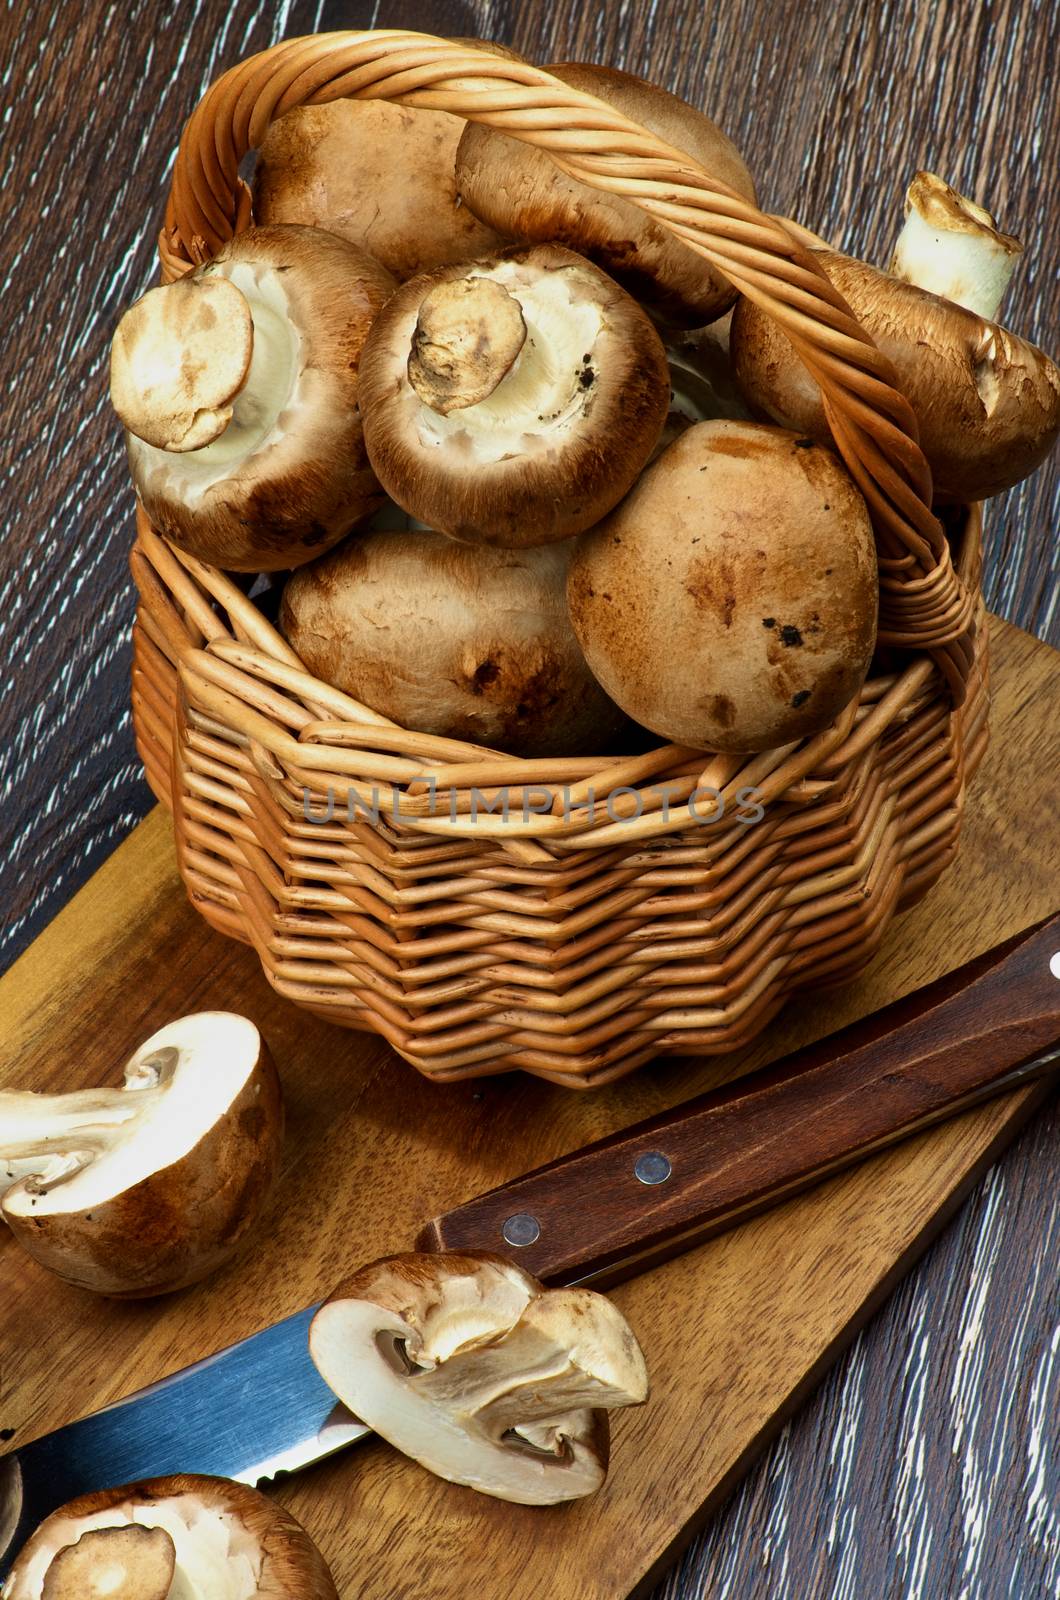 Gourmet Raw Portabello Mushrooms Full Body and Halves in Wicker Basket with Table Knife on Cutting Board closeup on Dark Wooden background